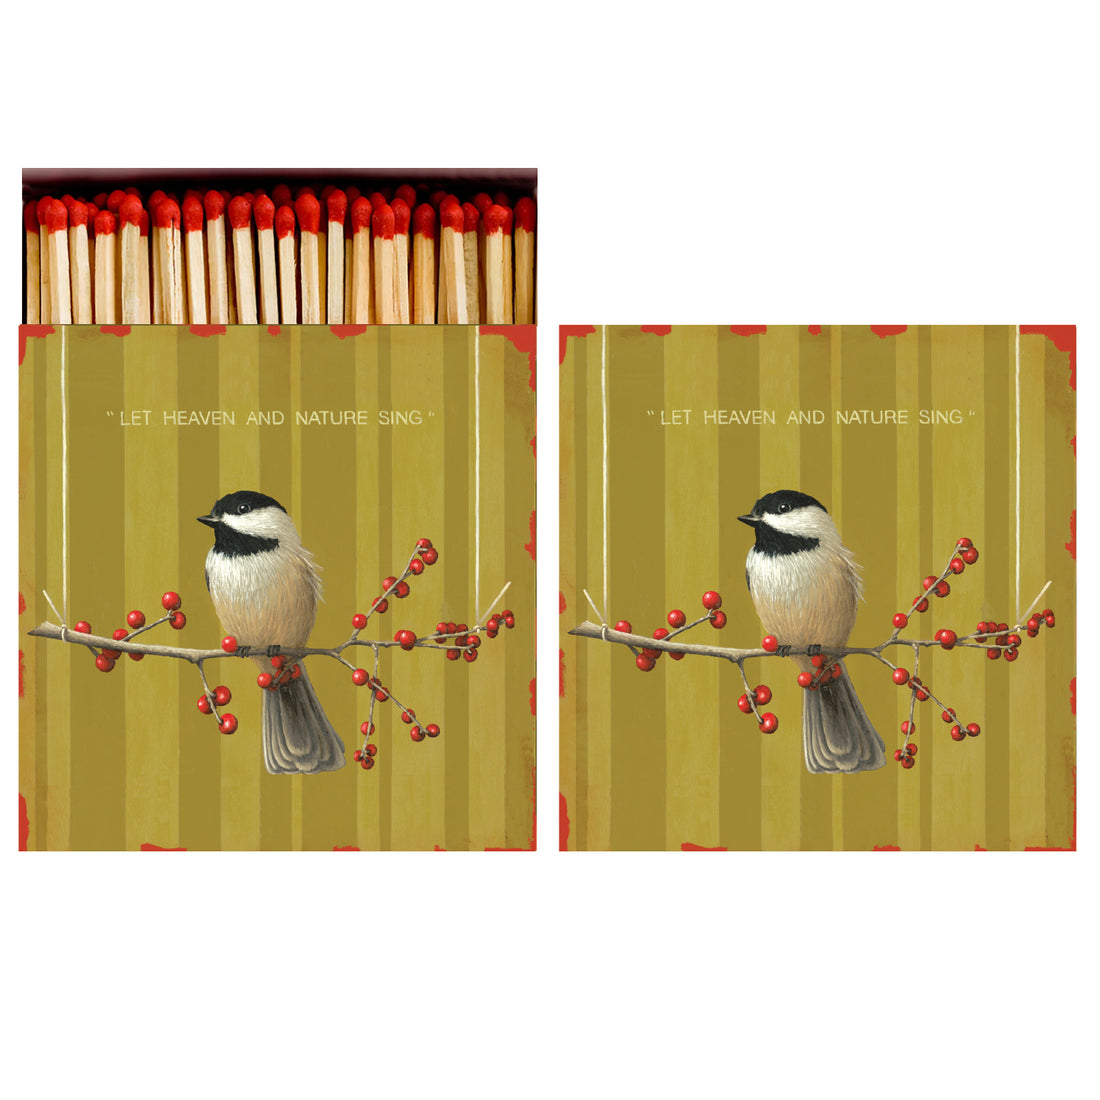 Two identical sides of a square match box, the left of which is open slightly to reveal the matches inside. The artwork on the box depicts a chickadee perched on a branch adorned with red berries, with &quot;LET HEAVEN AND NATURE SING&quot; printed in gold over the green-gold striped background.